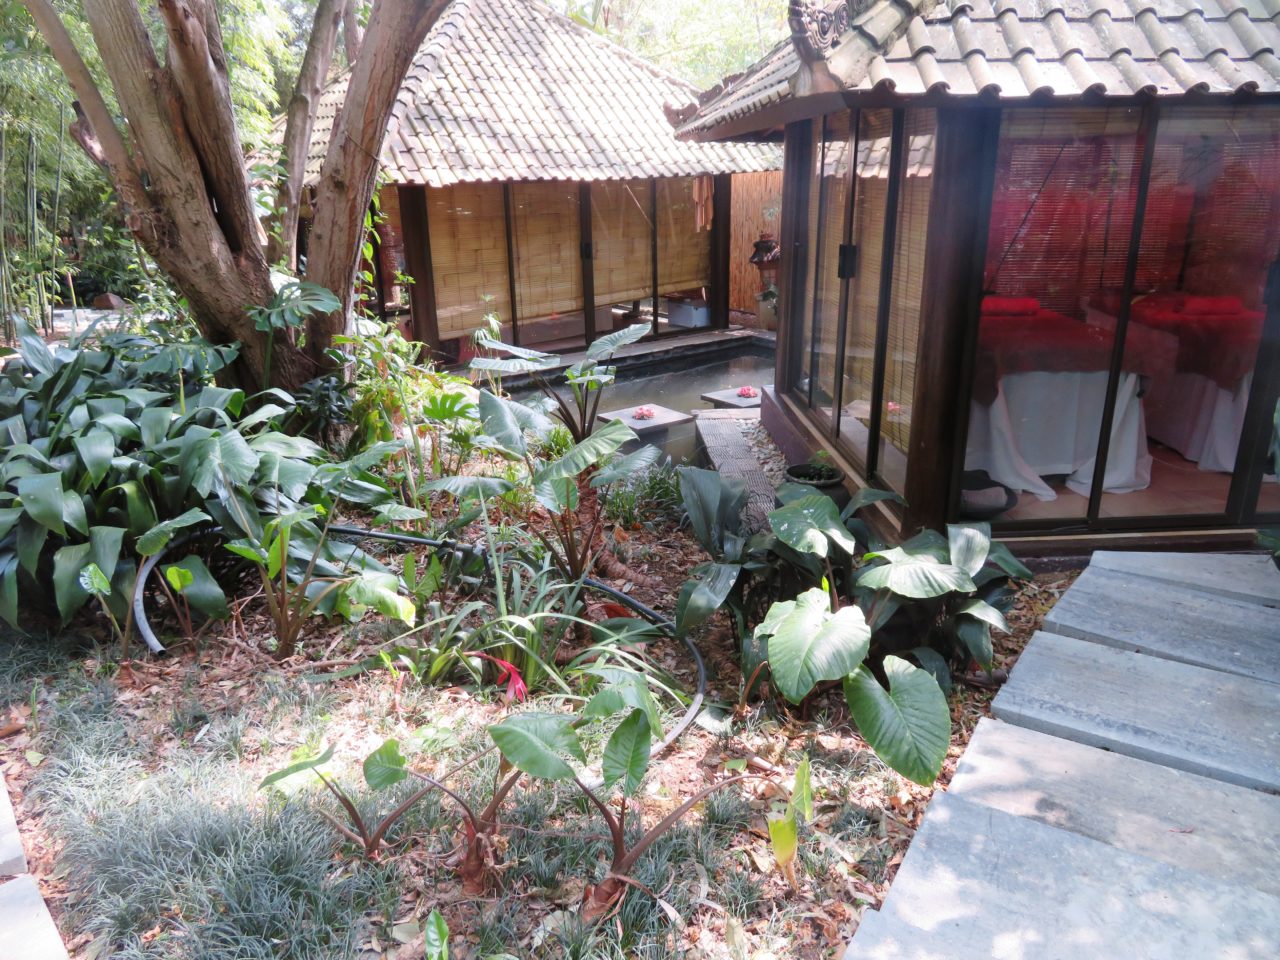 Fairlawns Boutique Hotel & Spa - Johannesburg, South Africa ! Massage Cabanas in the Balinese Garden of the Spa